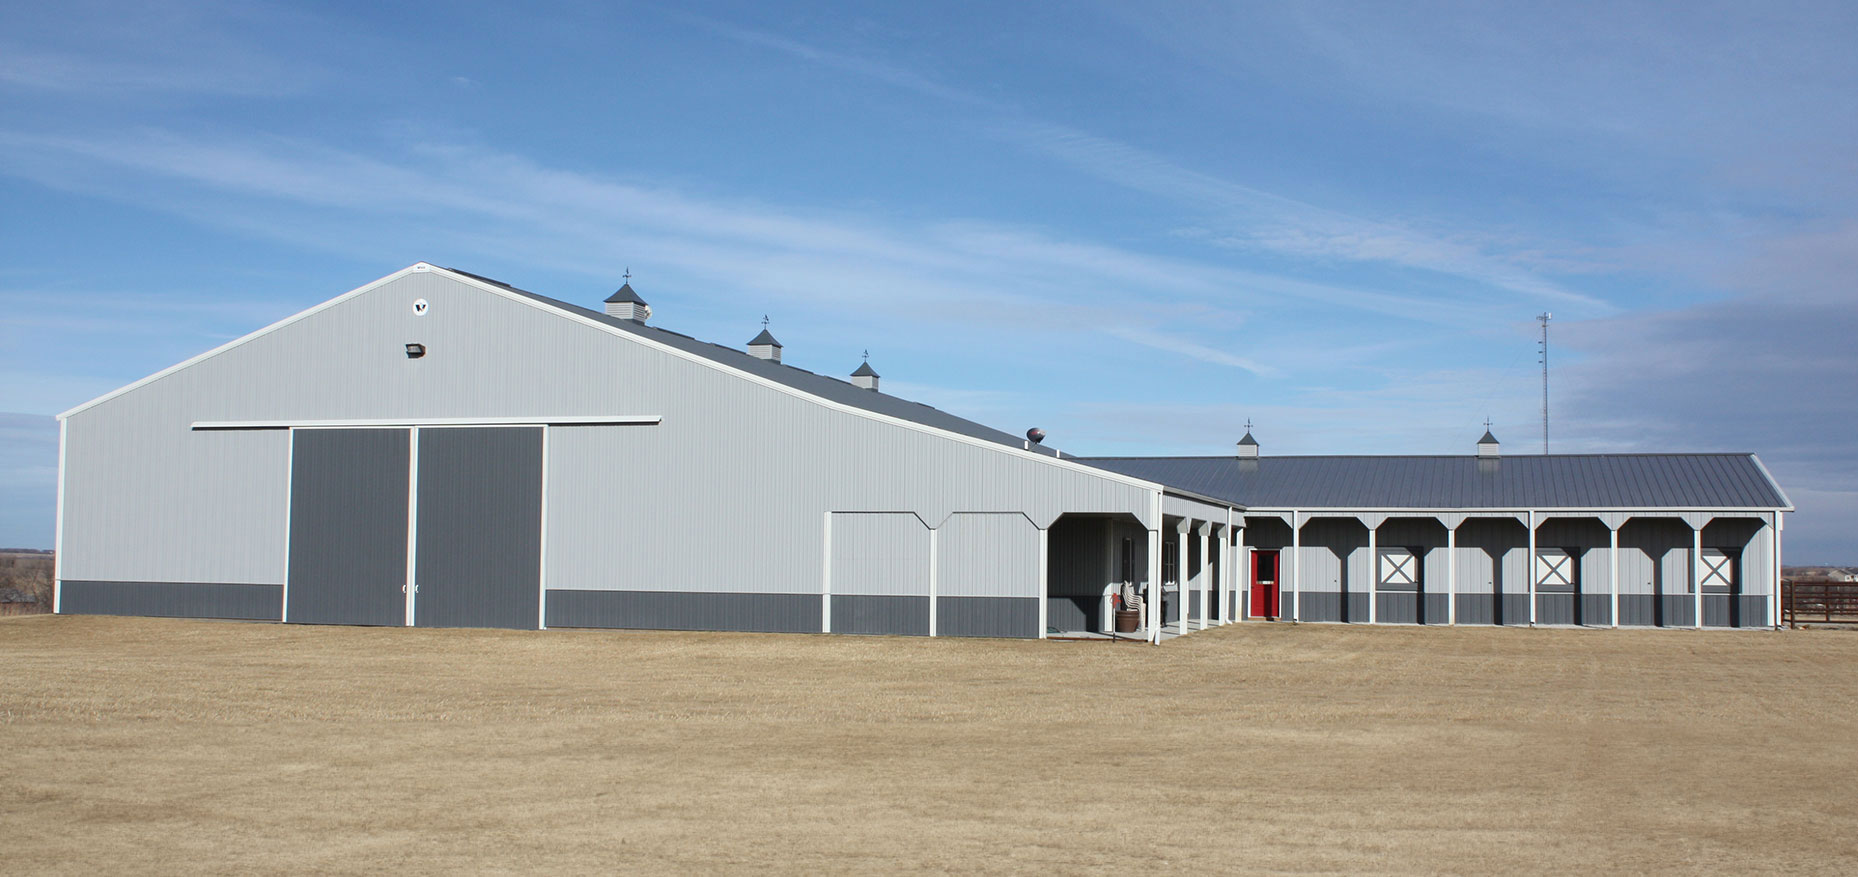 Equestrian Stables and Riding Arena